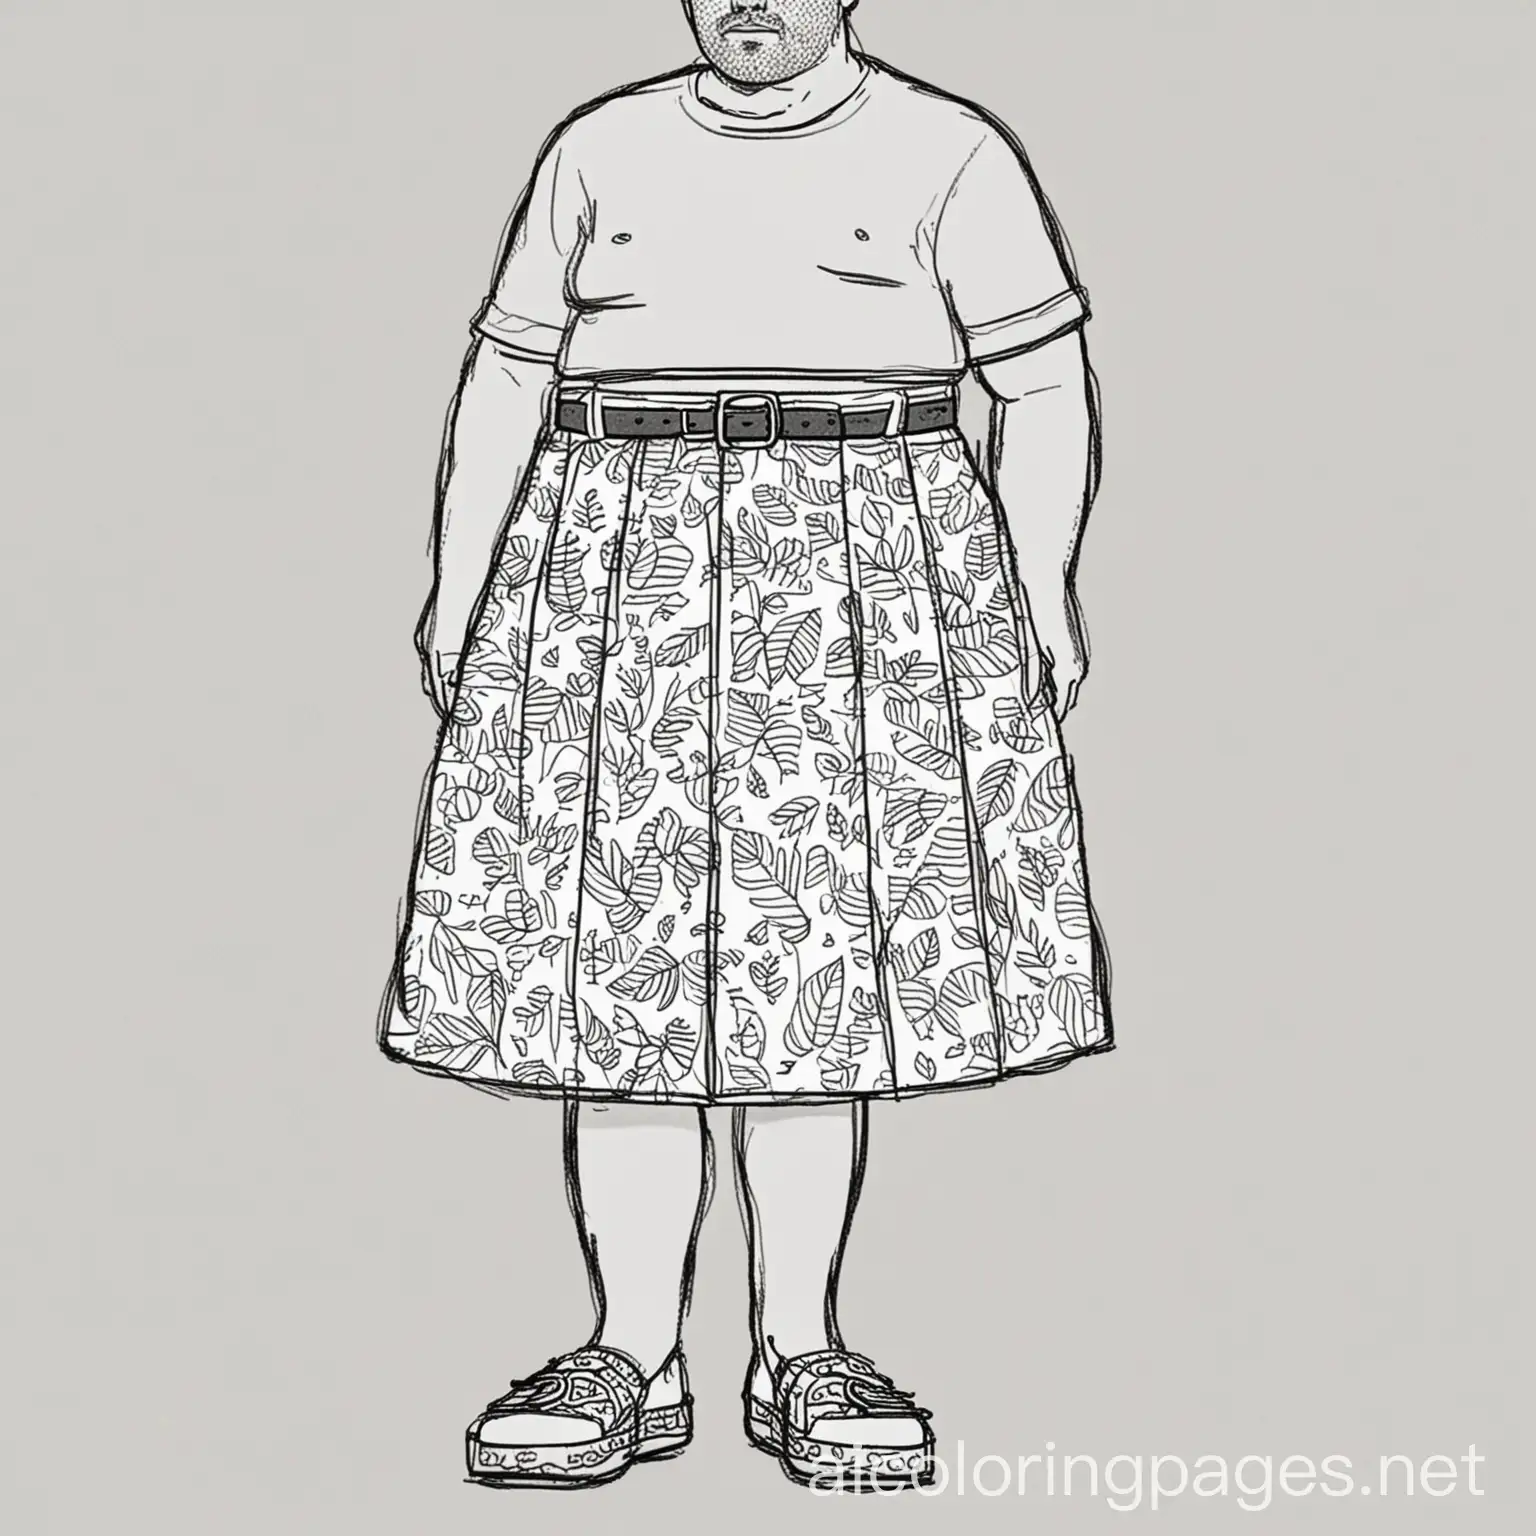  a tall fat guy wiht  short hair and NO facial hair ir beard in crocs wears a skirt wiht leaf  pattern and big belt , Coloring Page, black and white, line art, white background, Simplicity, Ample White Space. The background of the coloring page is plain white to make it easy for young children to color within the lines. The outlines of all the subjects are easy to distinguish, making it simple for kids to color without too much difficulty